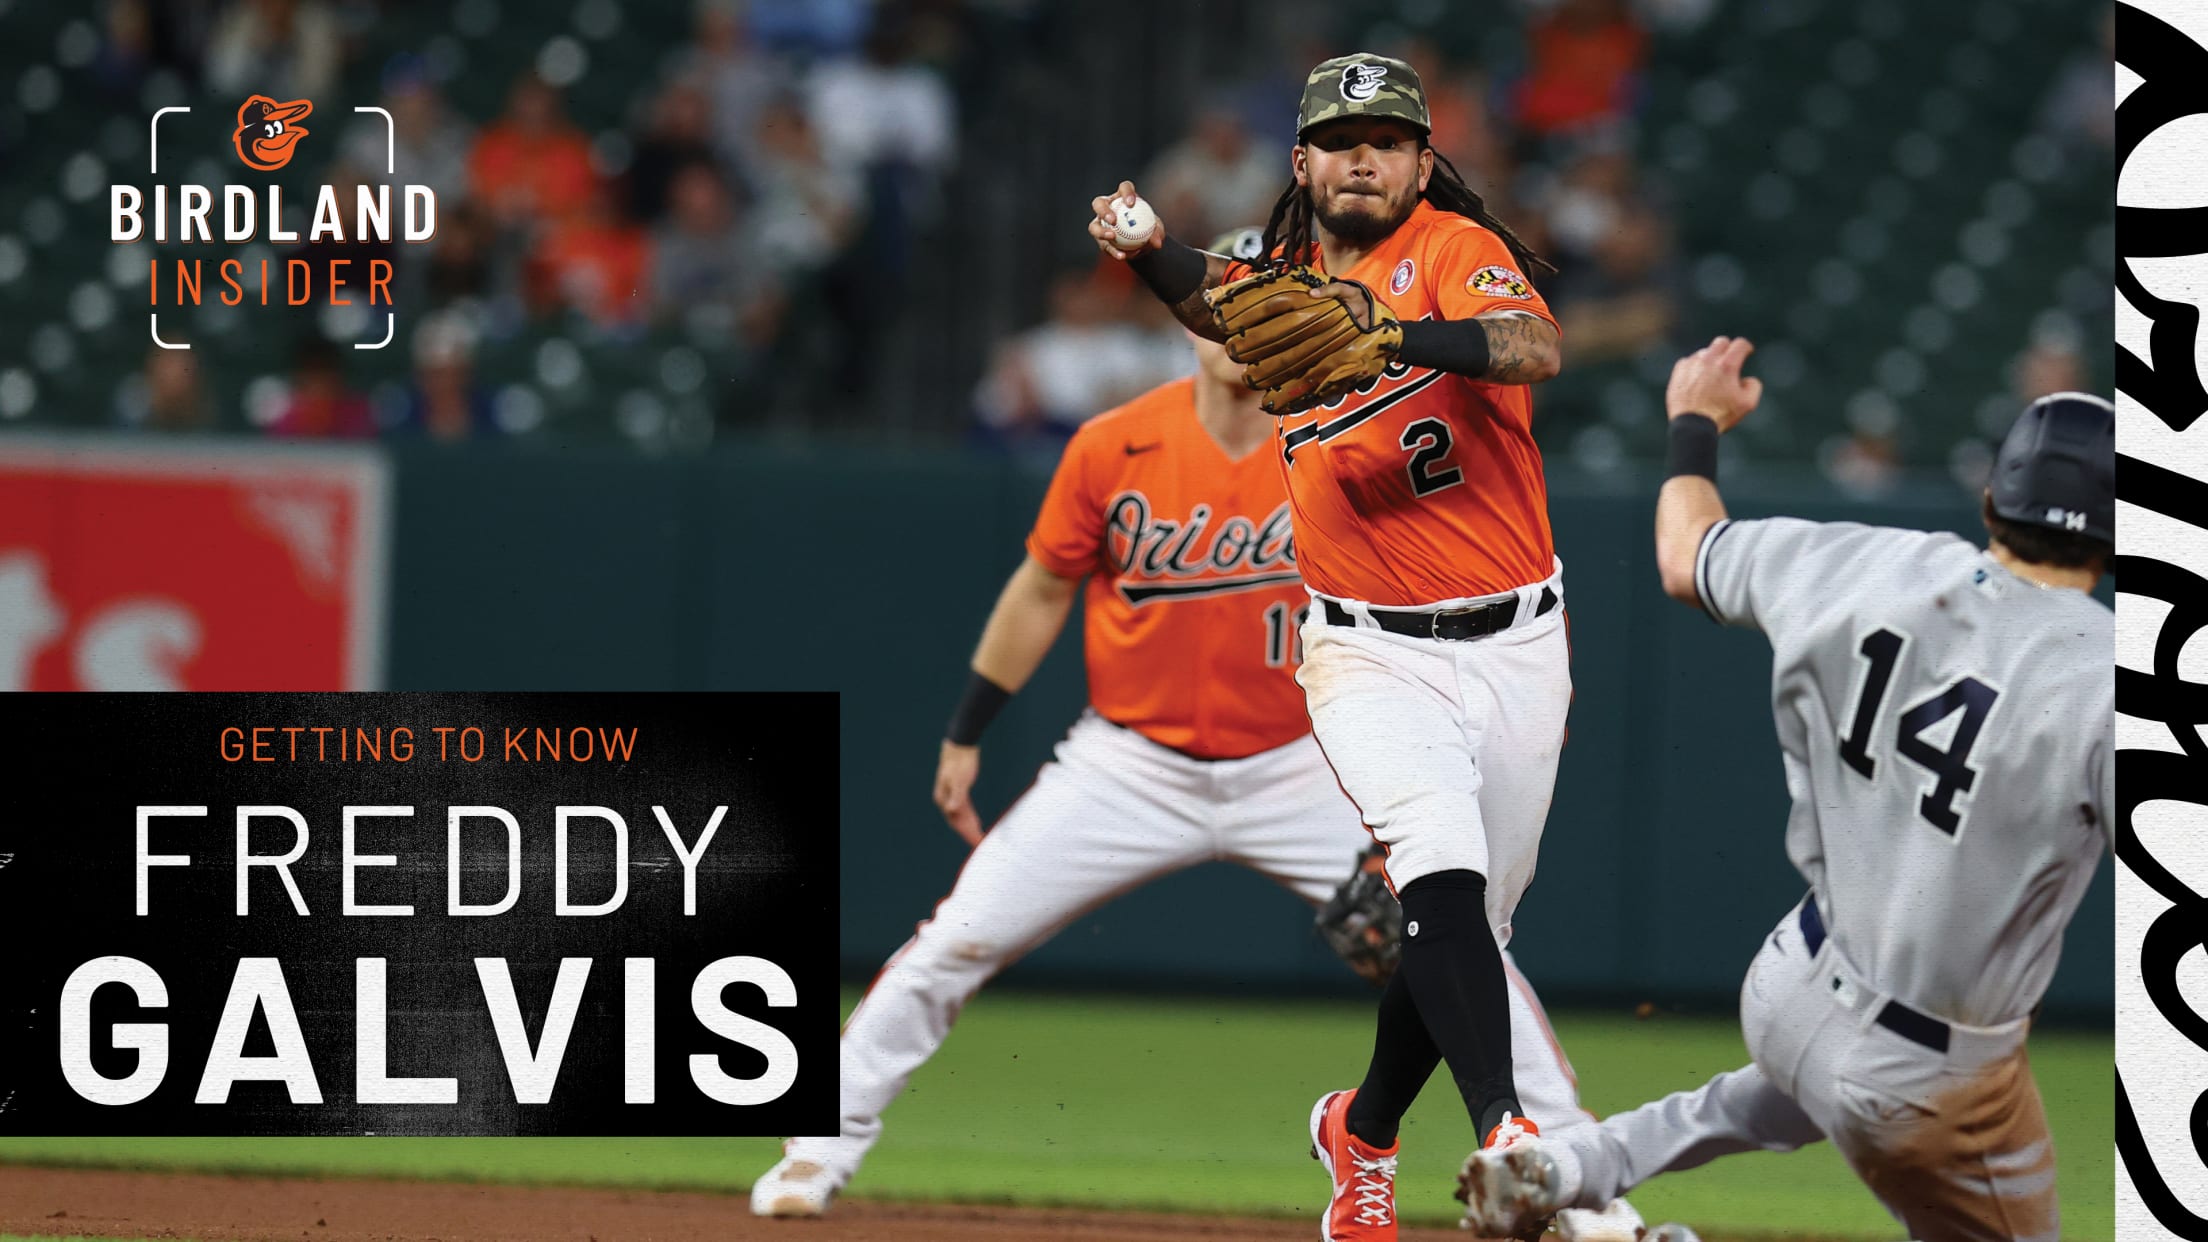 bal-getting-to-know-freddy-galvis-header